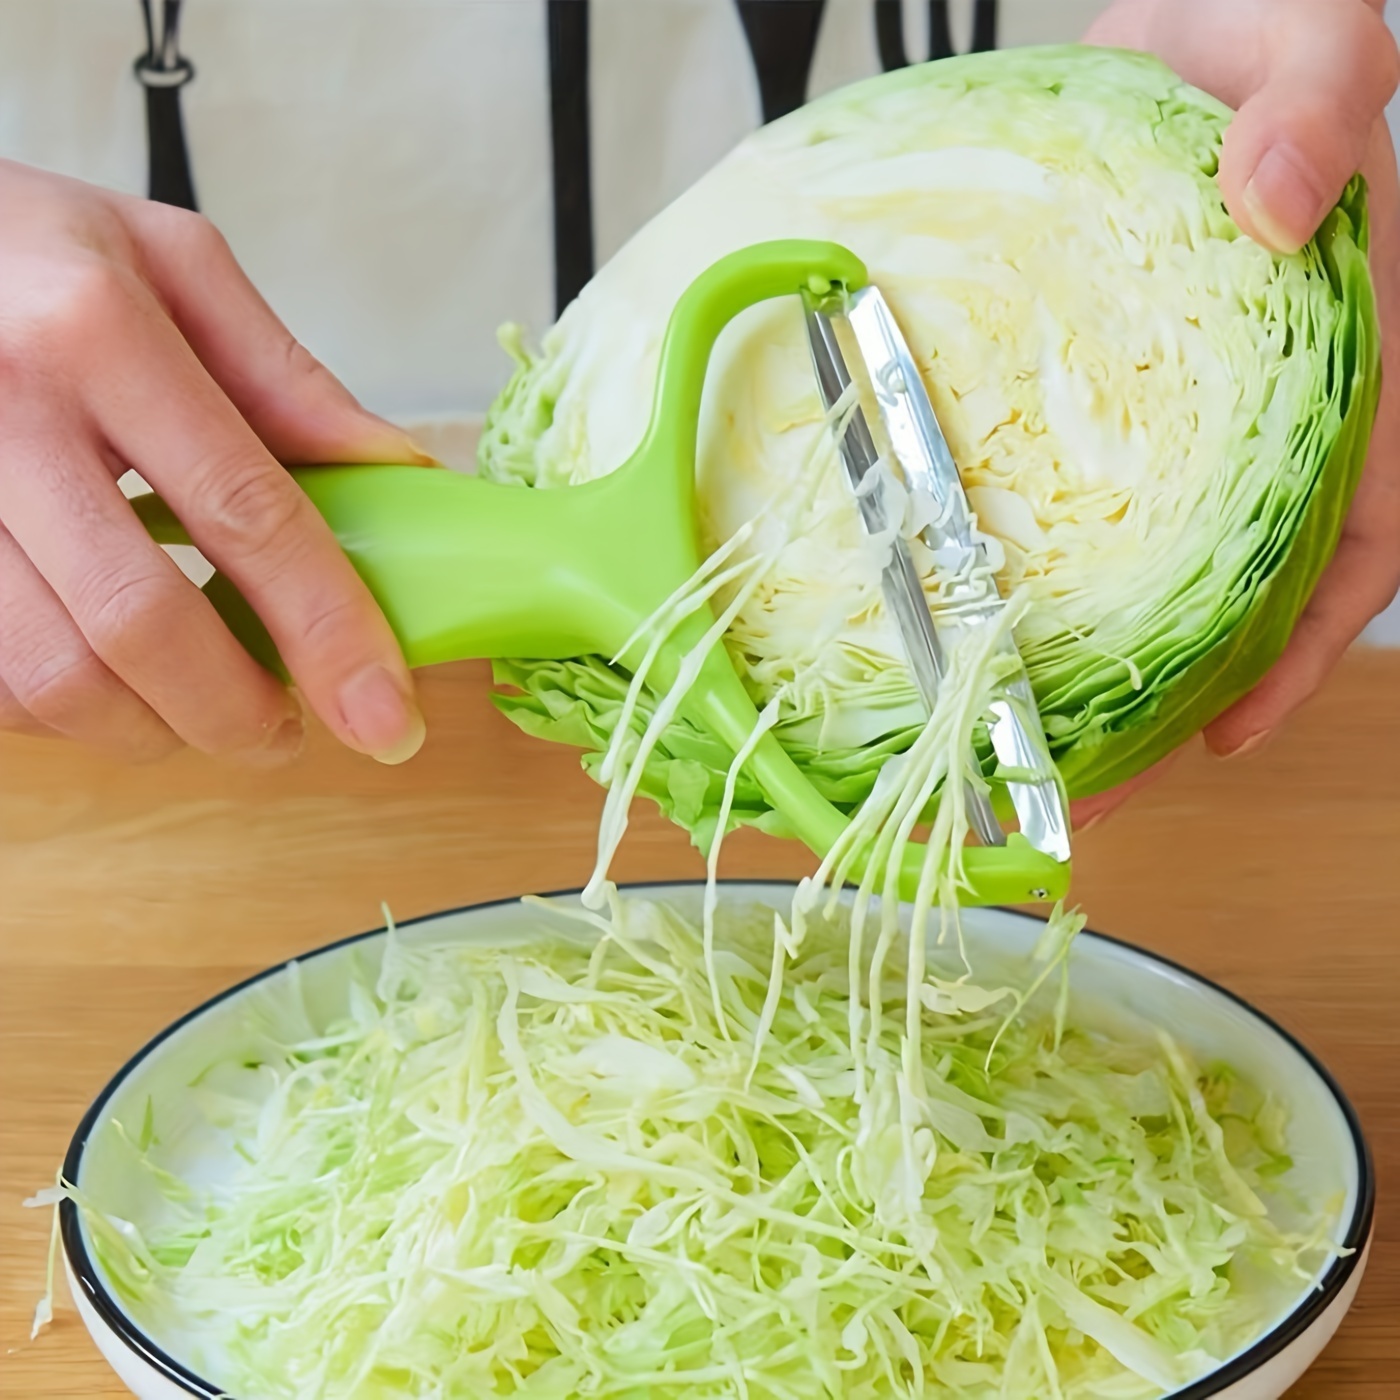 

1pc, Cabbage Grater, Multifunctional Stainless Steel Fruit And Vegetable Peeler And Grater - Perfect For Slicing, Grating, And Scraping - Kitchen Essential